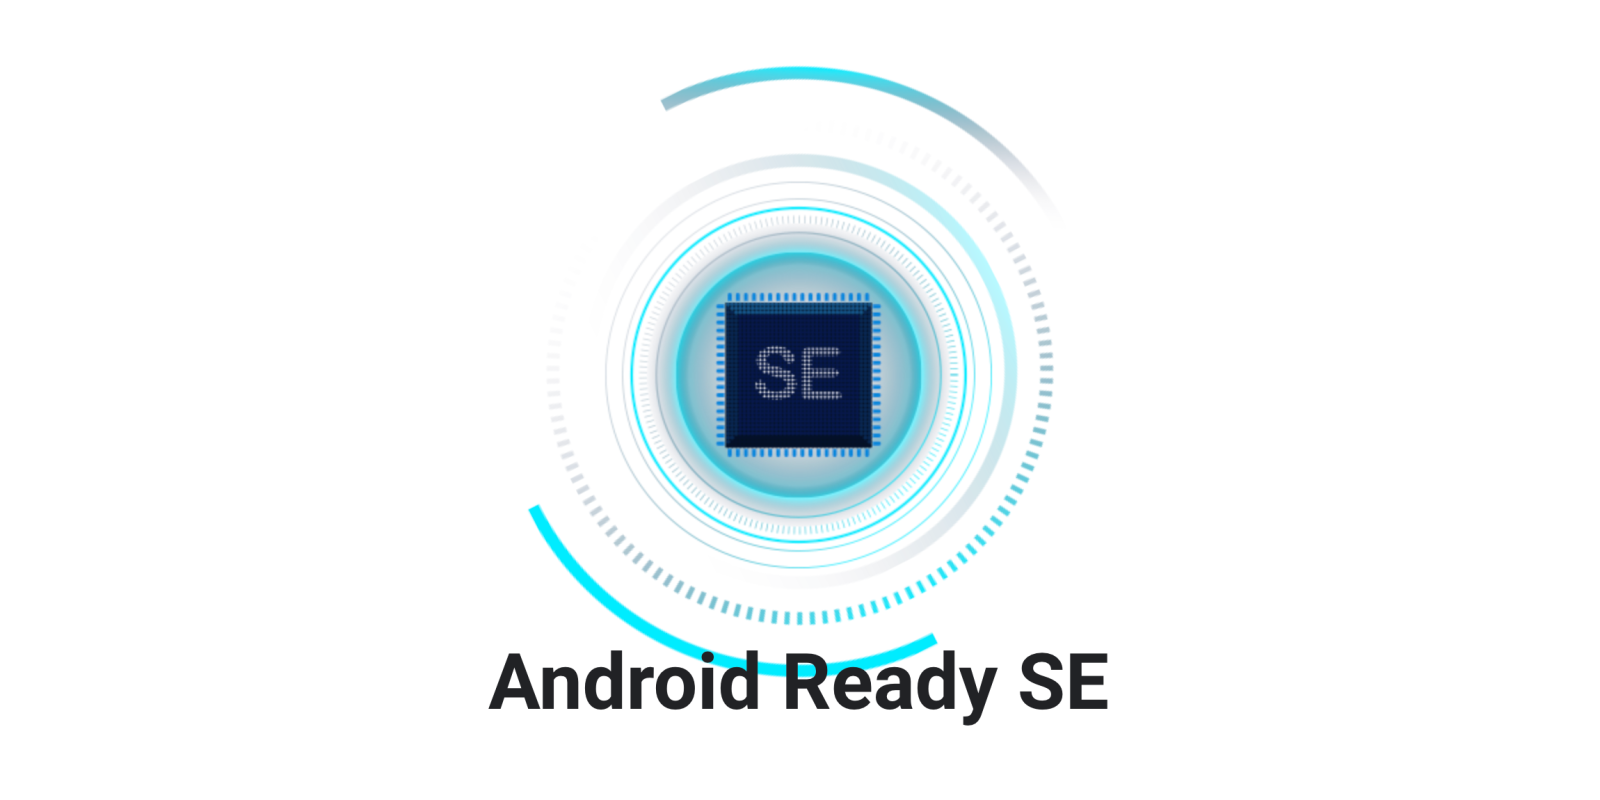 Google has introduced 'Android Ready SE Alliance' for users to use their  digital keys, digital wallet and IDs with more security